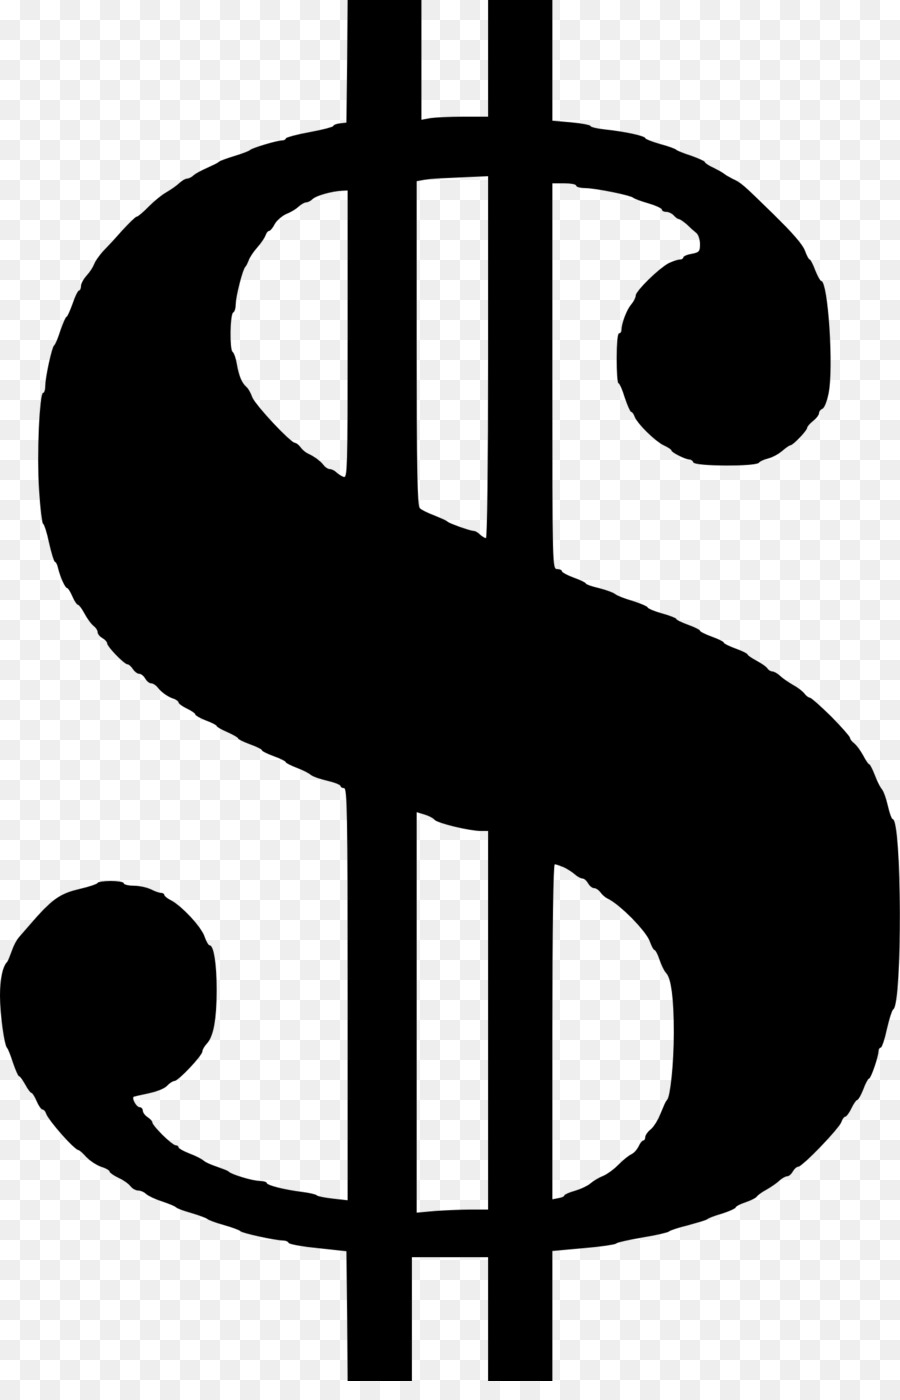 Dollar sign clipart black and white